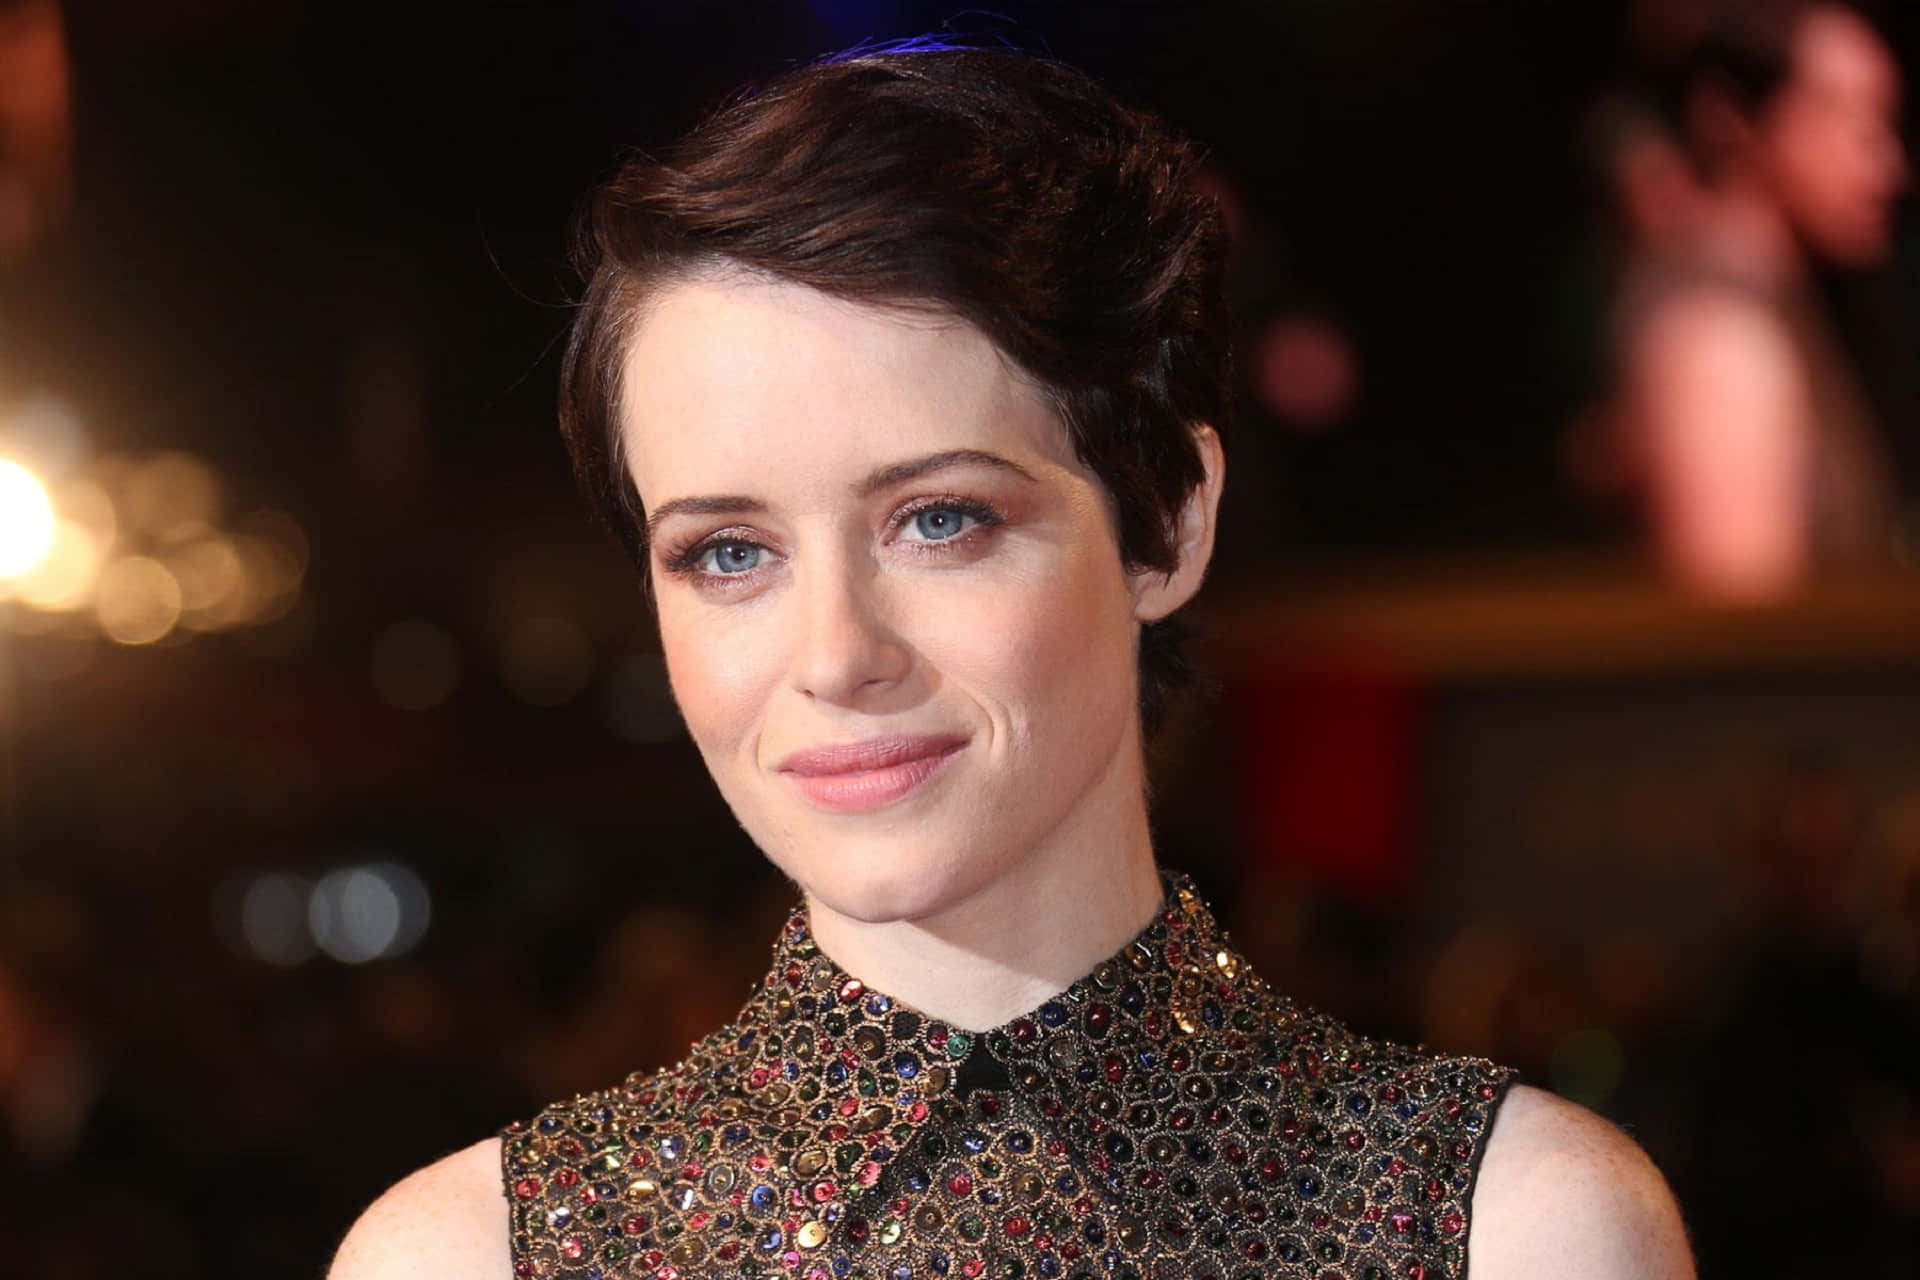 Actress Claire Foy Sparkling In Glamorous Dress Wallpaper